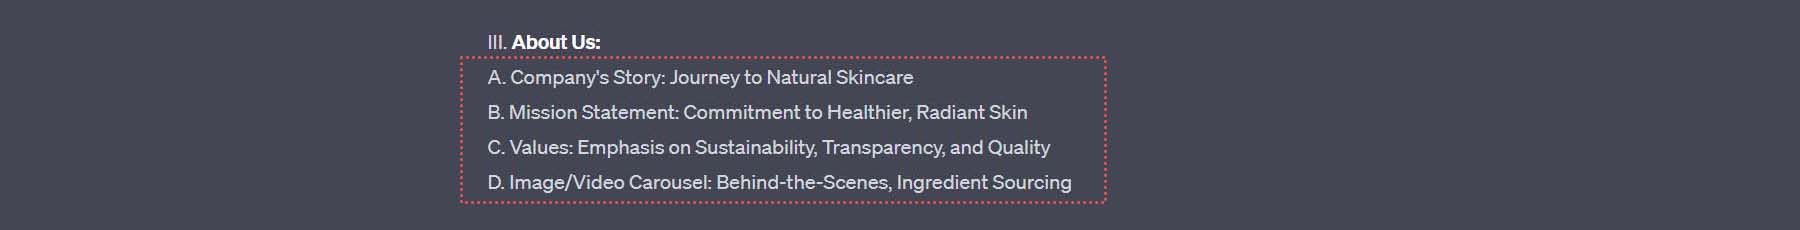 ChatGPT's outline for the about us section of our skincare landing page